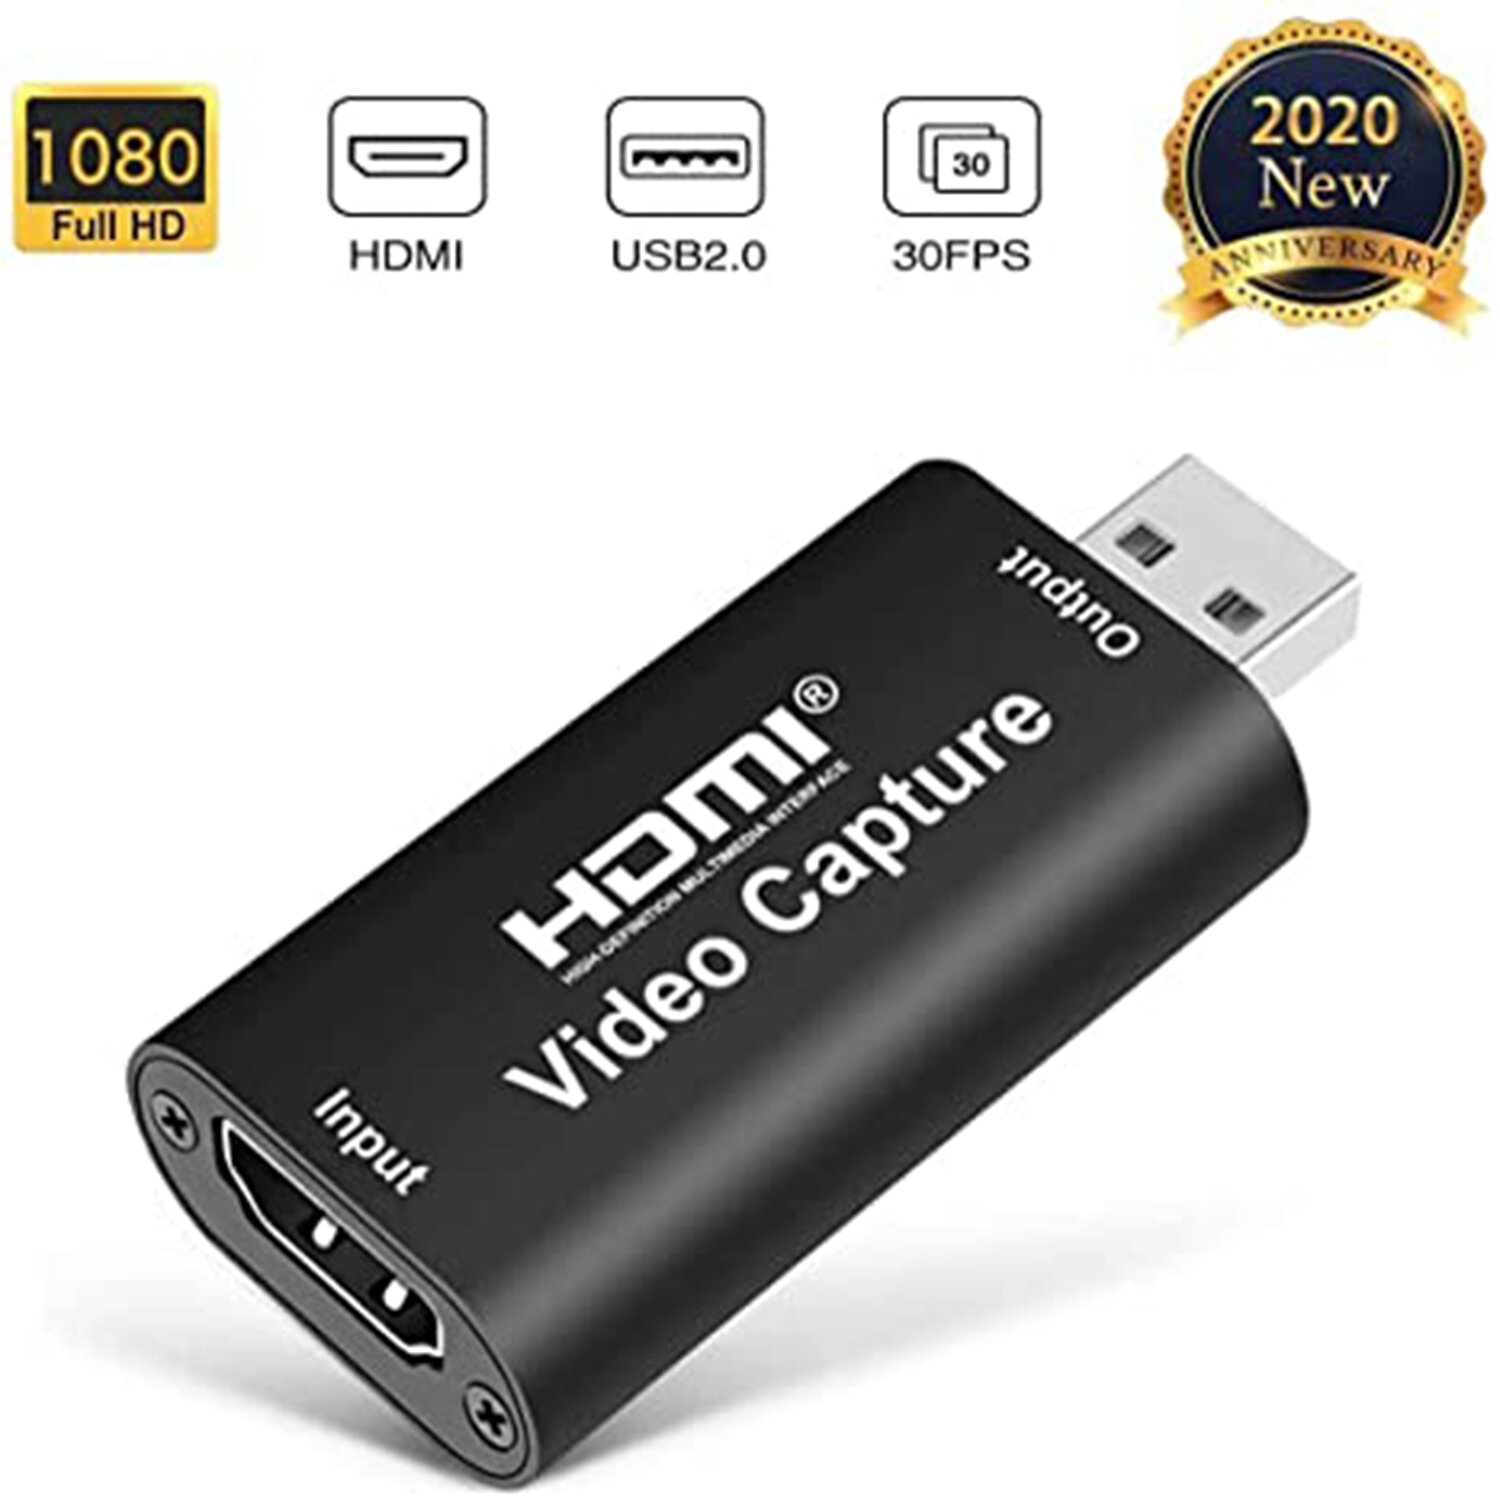 Bakeey 4K Video Capture Card USB2.0 HDMI Video Grabber Record Box for PS4 Game DVD Camcorder Camera Recording Live Strea